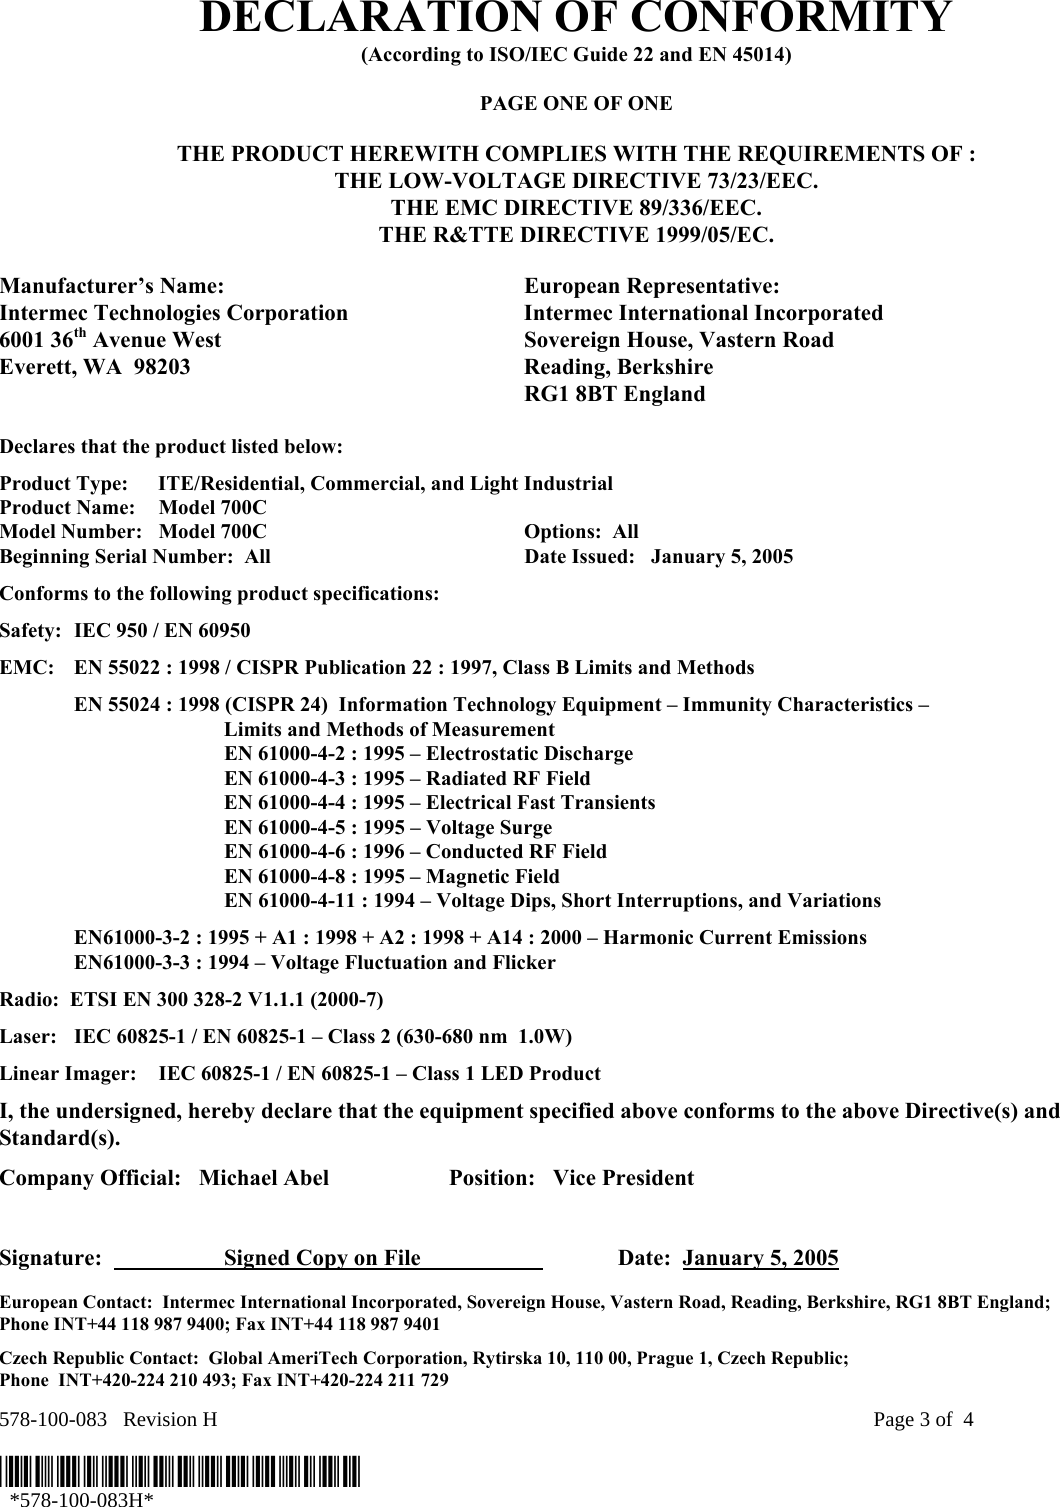 578-100-083   Revision H    Page 3 of  4  *578-100-083H*   *578-100-083H* DECLARATION OF CONFORMITY (According to ISO/IEC Guide 22 and EN 45014)  PAGE ONE OF ONE  THE PRODUCT HEREWITH COMPLIES WITH THE REQUIREMENTS OF : THE LOW-VOLTAGE DIRECTIVE 73/23/EEC. THE EMC DIRECTIVE 89/336/EEC. THE R&amp;TTE DIRECTIVE 1999/05/EC.  Manufacturer’s Name:  European Representative: Intermec Technologies Corporation  Intermec International Incorporated 6001 36th Avenue West  Sovereign House, Vastern Road Everett, WA  98203  Reading, Berkshire   RG1 8BT England  Declares that the product listed below: Product Type:  ITE/Residential, Commercial, and Light Industrial Product Name:    Model 700C Model Number:  Model 700C  Options:  All   Beginning Serial Number:  All  Date Issued:   January 5, 2005 Conforms to the following product specifications: Safety:  IEC 950 / EN 60950 EMC:  EN 55022 : 1998 / CISPR Publication 22 : 1997, Class B Limits and Methods   EN 55024 : 1998 (CISPR 24)  Information Technology Equipment – Immunity Characteristics –        Limits and Methods of Measurement     EN 61000-4-2 : 1995 – Electrostatic Discharge     EN 61000-4-3 : 1995 – Radiated RF Field     EN 61000-4-4 : 1995 – Electrical Fast Transients     EN 61000-4-5 : 1995 – Voltage Surge     EN 61000-4-6 : 1996 – Conducted RF Field     EN 61000-4-8 : 1995 – Magnetic Field     EN 61000-4-11 : 1994 – Voltage Dips, Short Interruptions, and Variations   EN61000-3-2 : 1995 + A1 : 1998 + A2 : 1998 + A14 : 2000 – Harmonic Current Emissions   EN61000-3-3 : 1994 – Voltage Fluctuation and Flicker Radio:  ETSI EN 300 328-2 V1.1.1 (2000-7) Laser:  IEC 60825-1 / EN 60825-1 – Class 2 (630-680 nm  1.0W) Linear Imager:  IEC 60825-1 / EN 60825-1 – Class 1 LED Product I, the undersigned, hereby declare that the equipment specified above conforms to the above Directive(s) and Standard(s). Company Official:   Michael Abel  Position:   Vice President   Signature:    Signed Copy on File     Date:  January 5, 2005 European Contact:  Intermec International Incorporated, Sovereign House, Vastern Road, Reading, Berkshire, RG1 8BT England;  Phone INT+44 118 987 9400; Fax INT+44 118 987 9401 Czech Republic Contact:  Global AmeriTech Corporation, Rytirska 10, 110 00, Prague 1, Czech Republic;  Phone  INT+420-224 210 493; Fax INT+420-224 211 729 